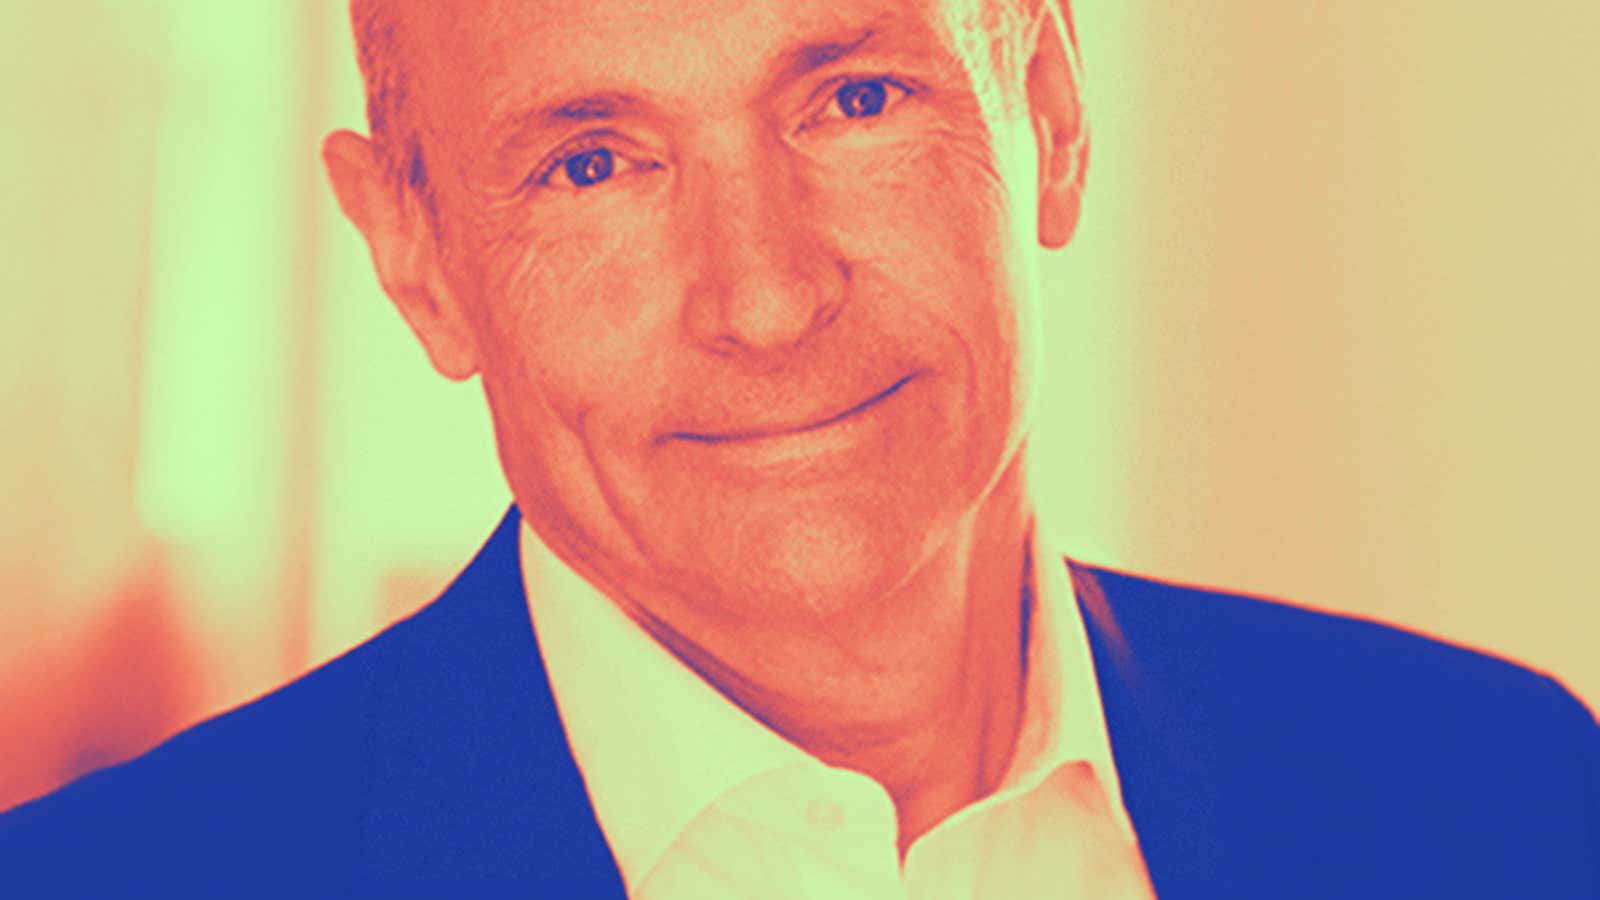 Tim Berners-Lee thinks the world can be better after Covid-19